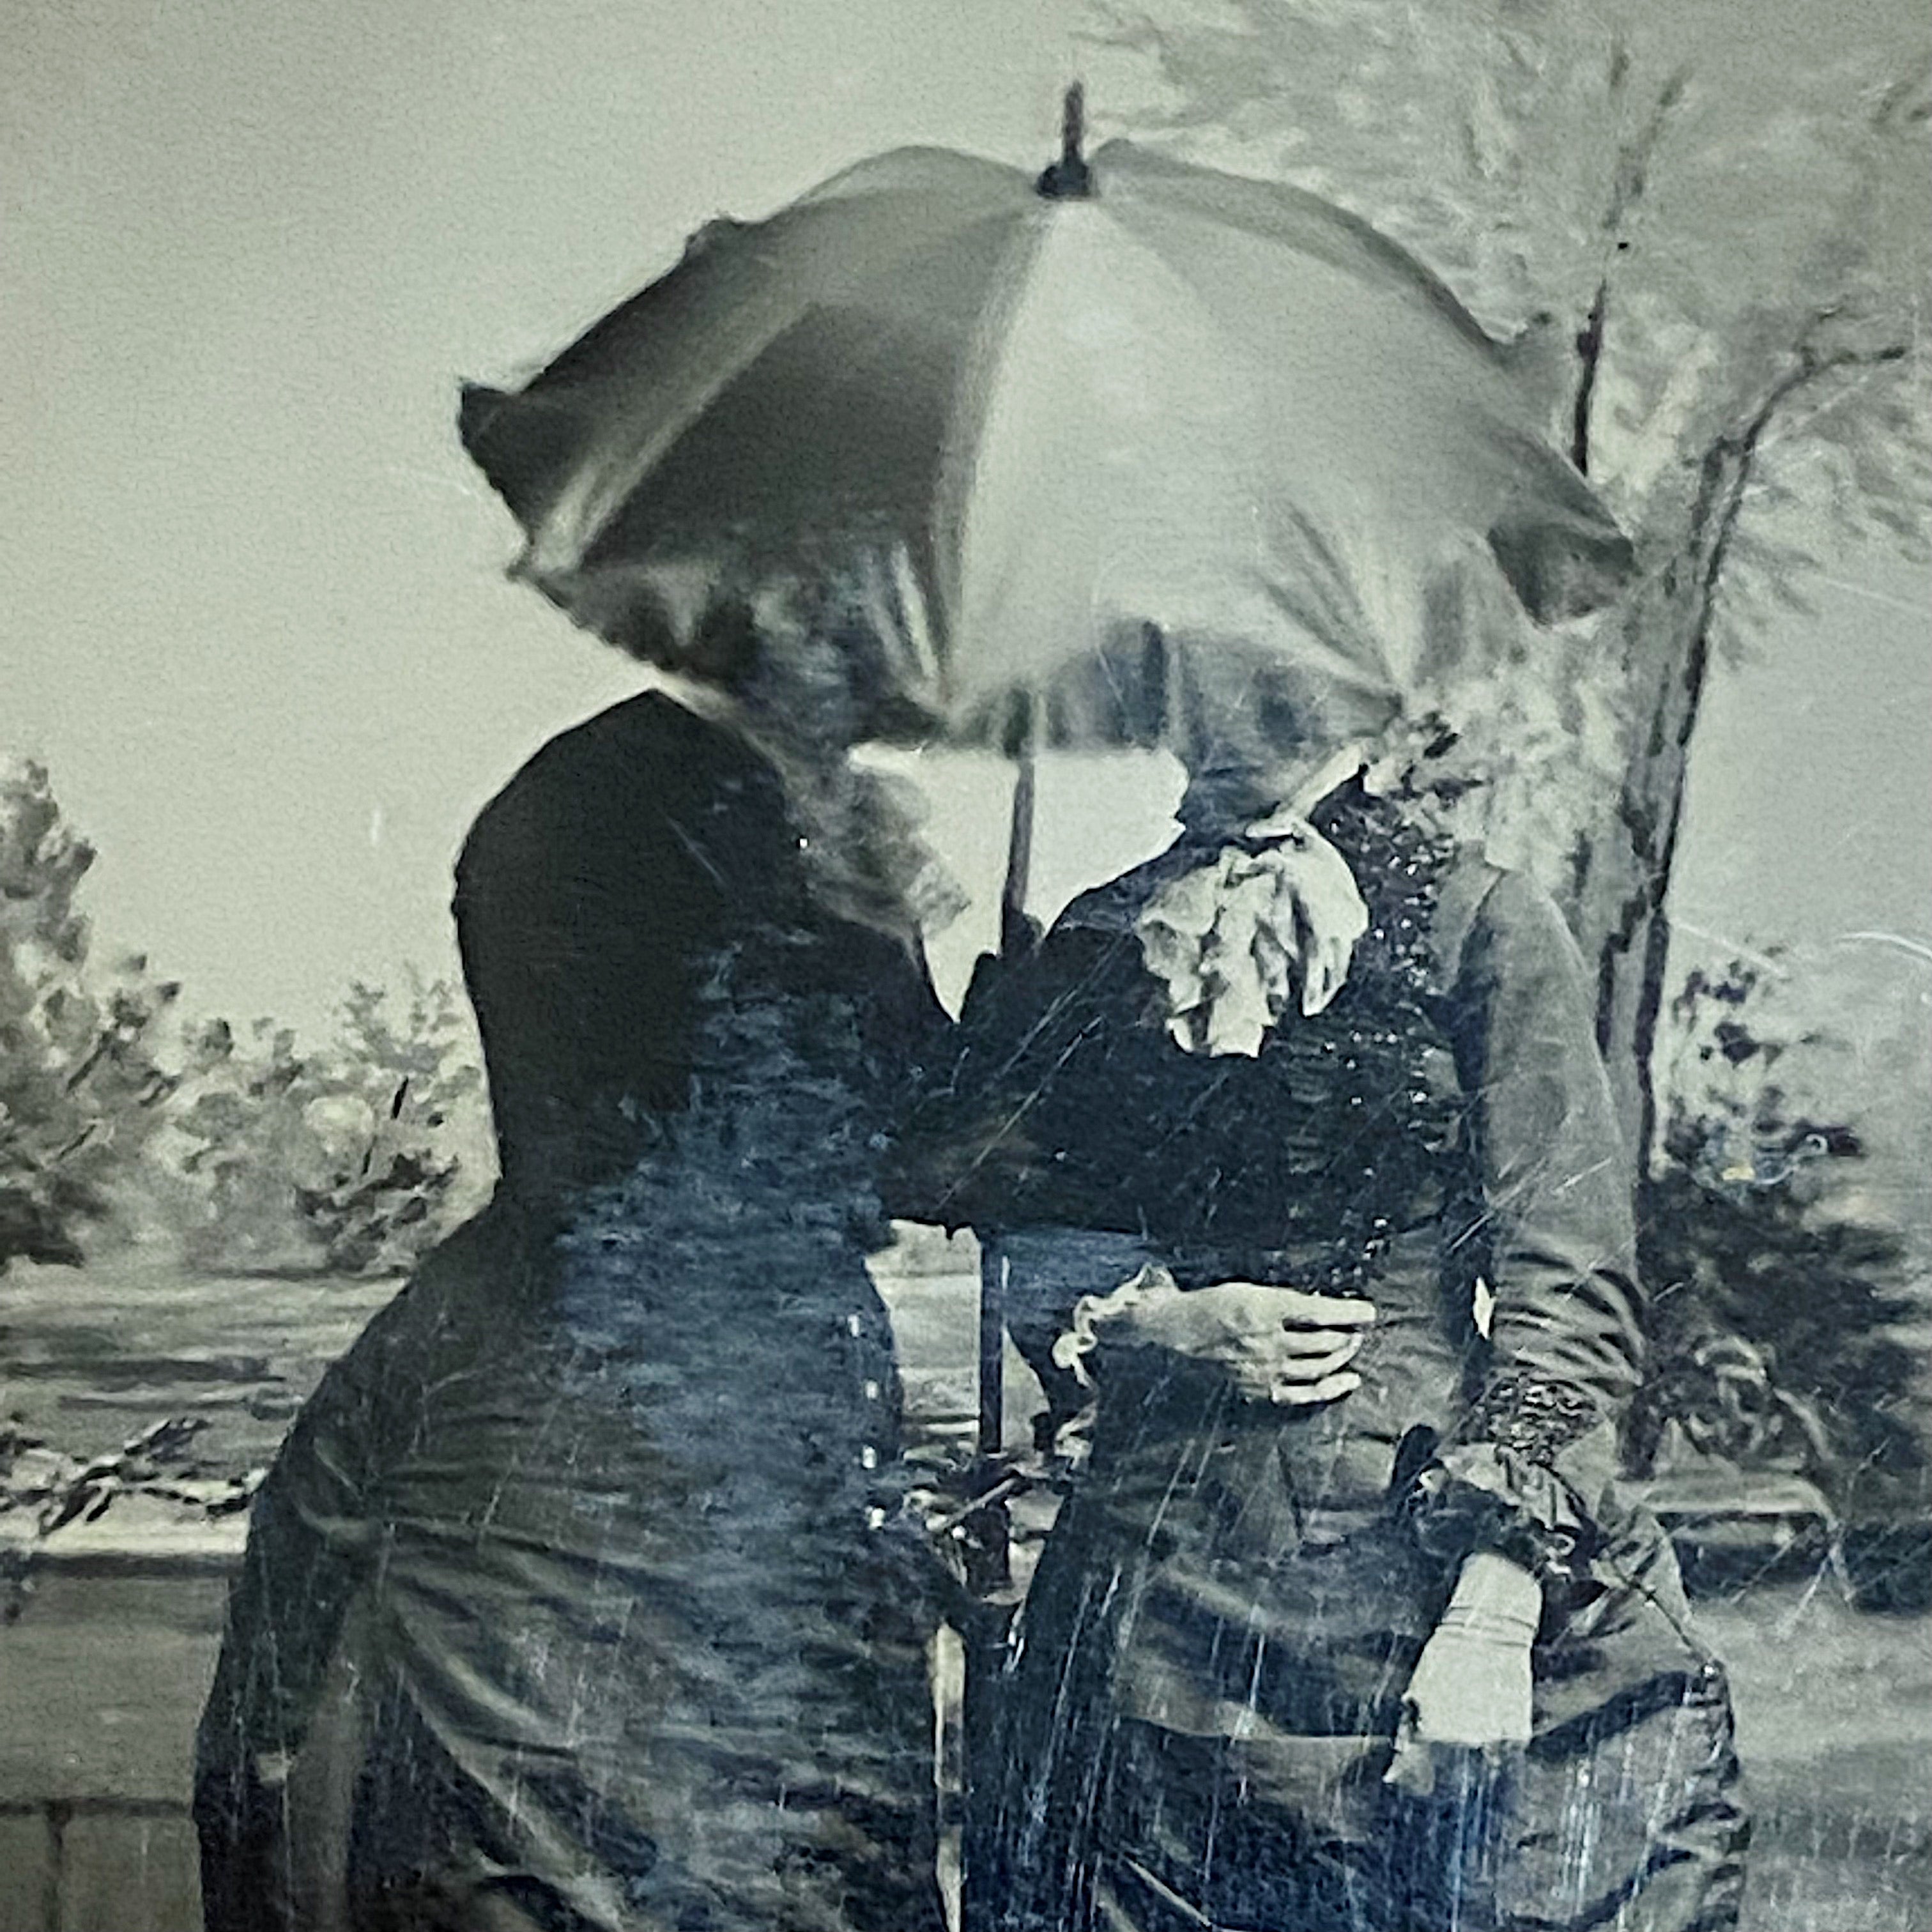 Unusual Rare Antique Tintype of Women Hiding Behind Open Umbrella - 1880s - Unusual 19th Century Collectible Photography - Strange Old Image -